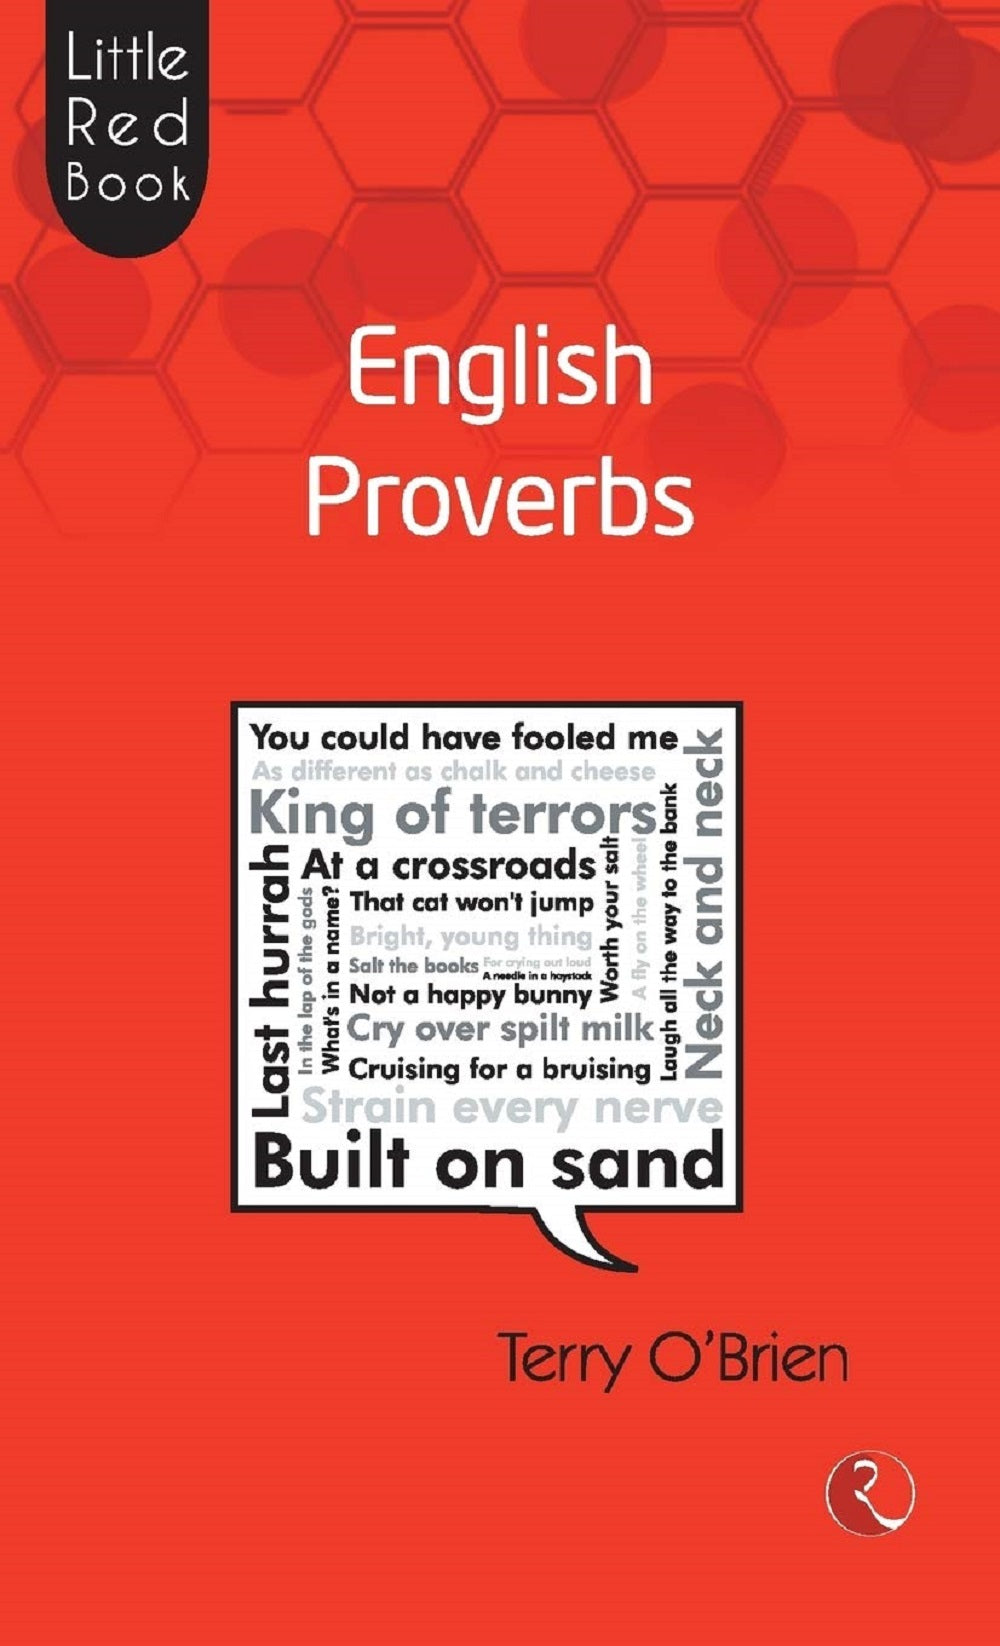 LITTLE RED BOOK ENGLISH PROVERBS